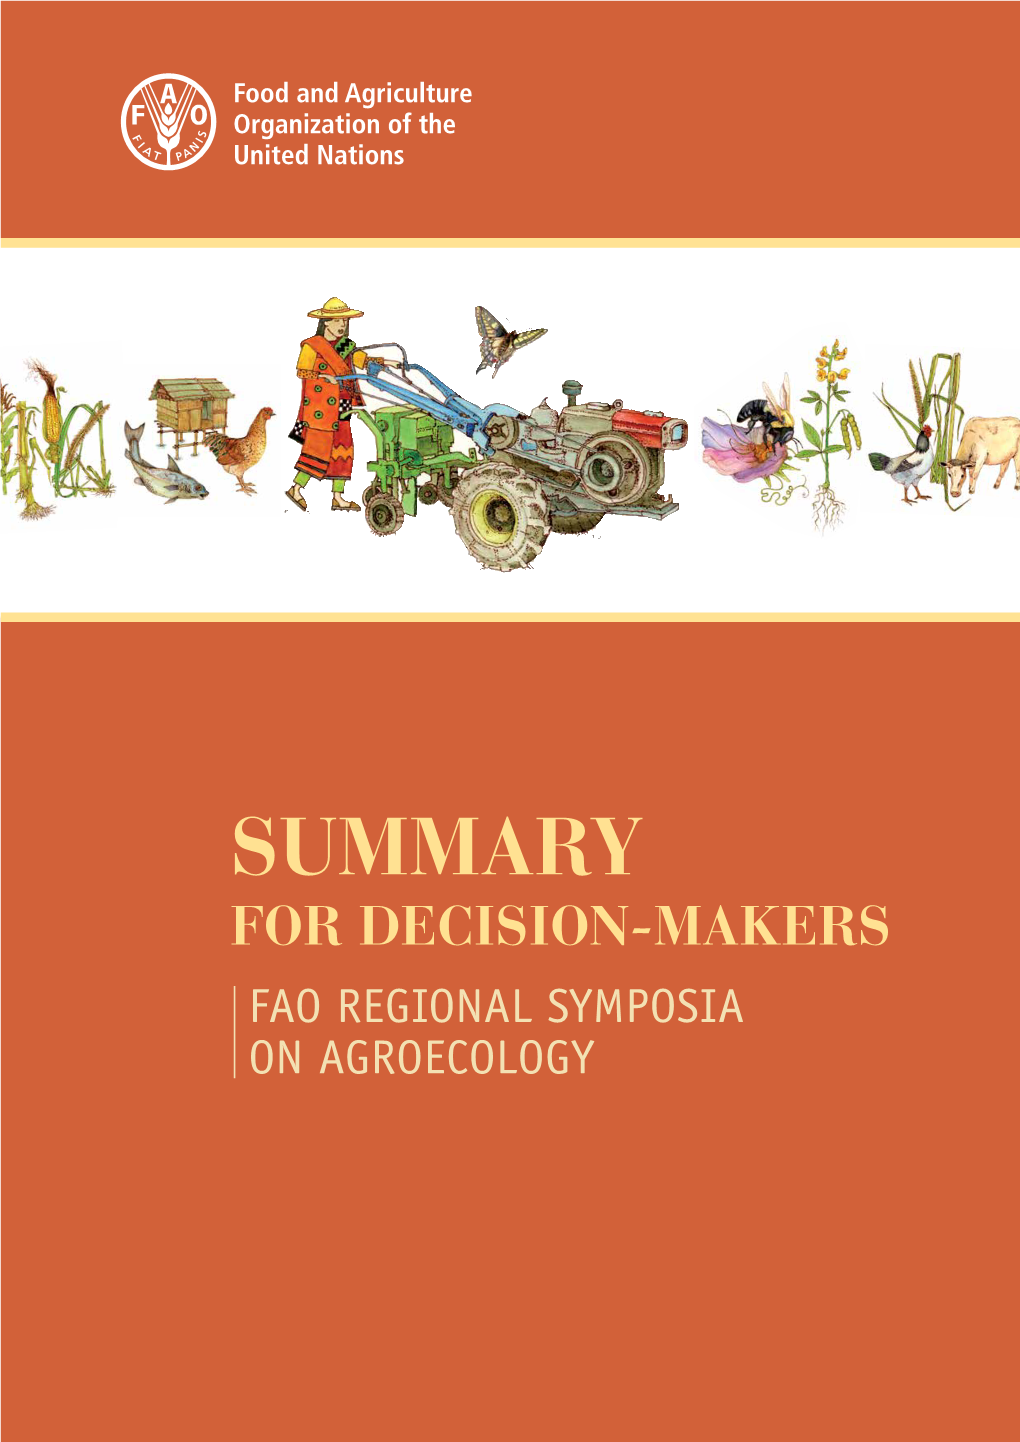 For Decision-Makers Fao Regional Symposia on Agroecology Summary for Decision-Makers Fao Regional Symposia on Agroecology